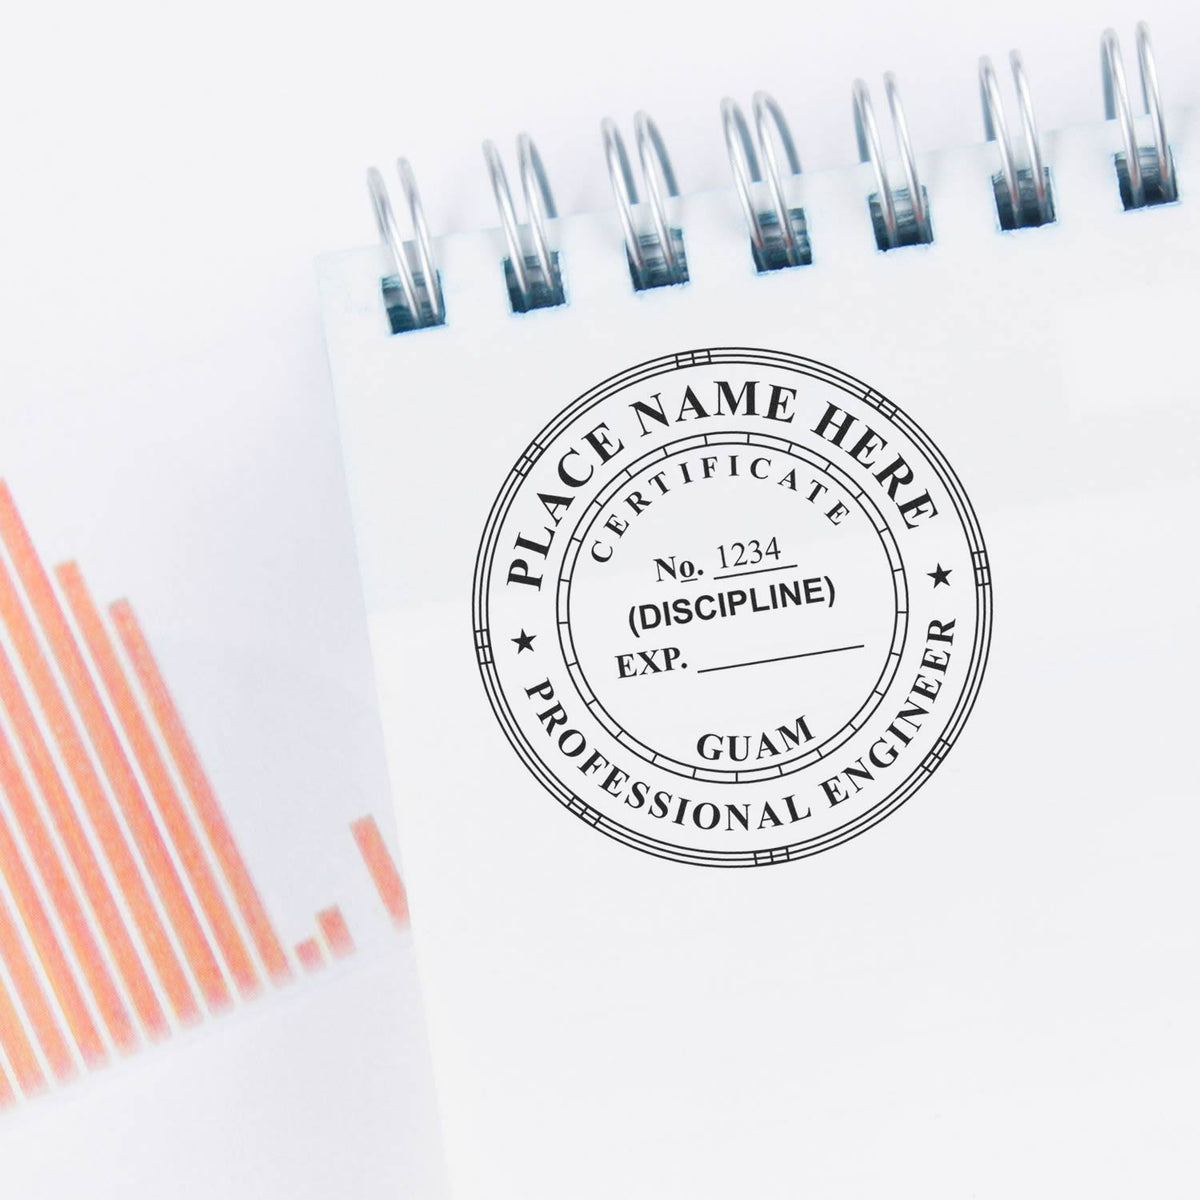 The Guam Professional Engineer Seal Stamp stamp impression comes to life with a crisp, detailed photo on paper - showcasing true professional quality.